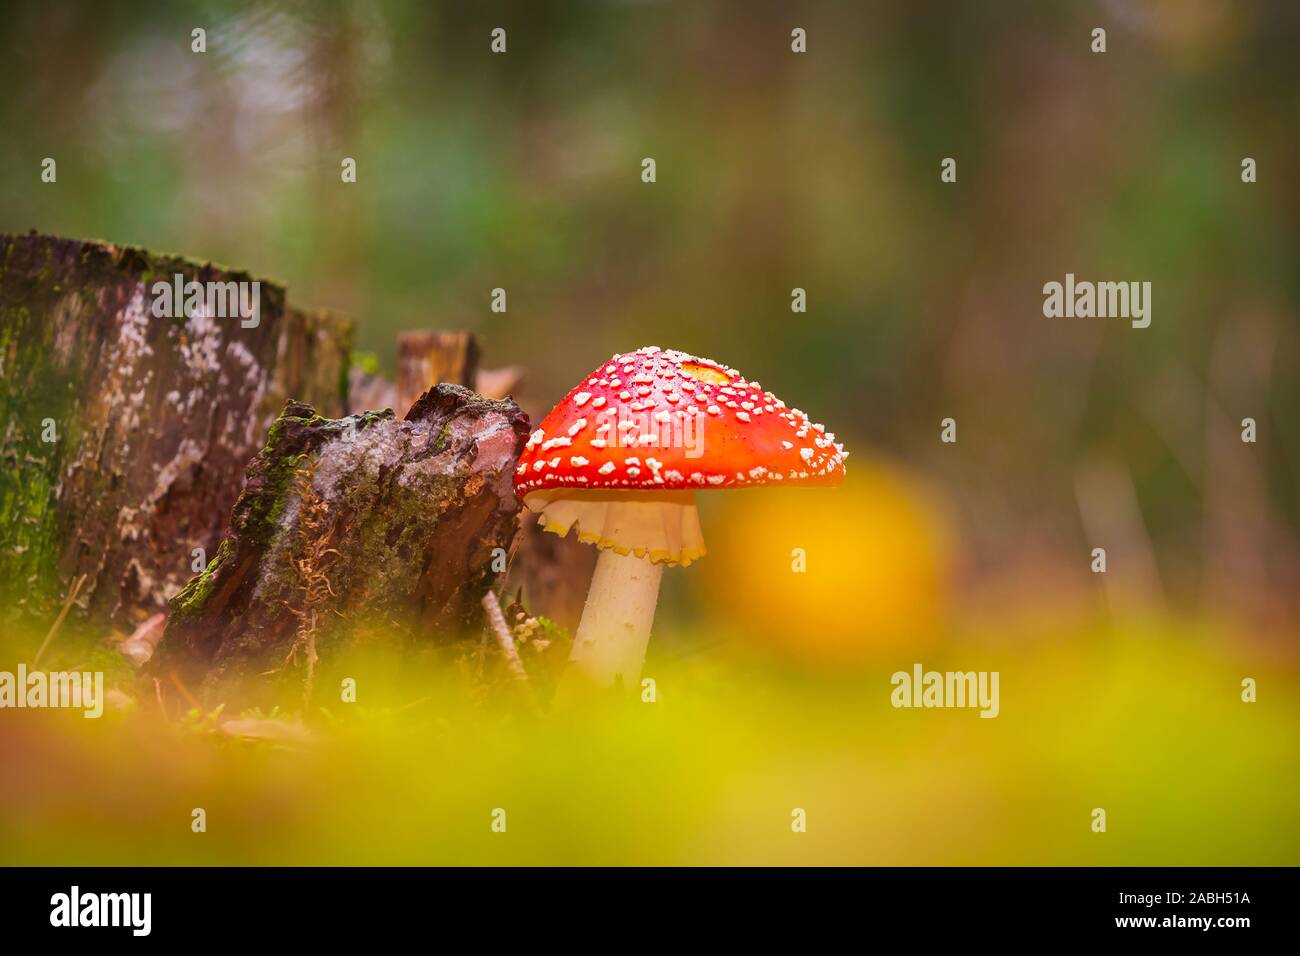 amanita muscaria, fly agaric or fly amanita basidiomycota muscimol mushroom with typical white spots on a red hat in a forest. Natural light, vibrant Stock Photo